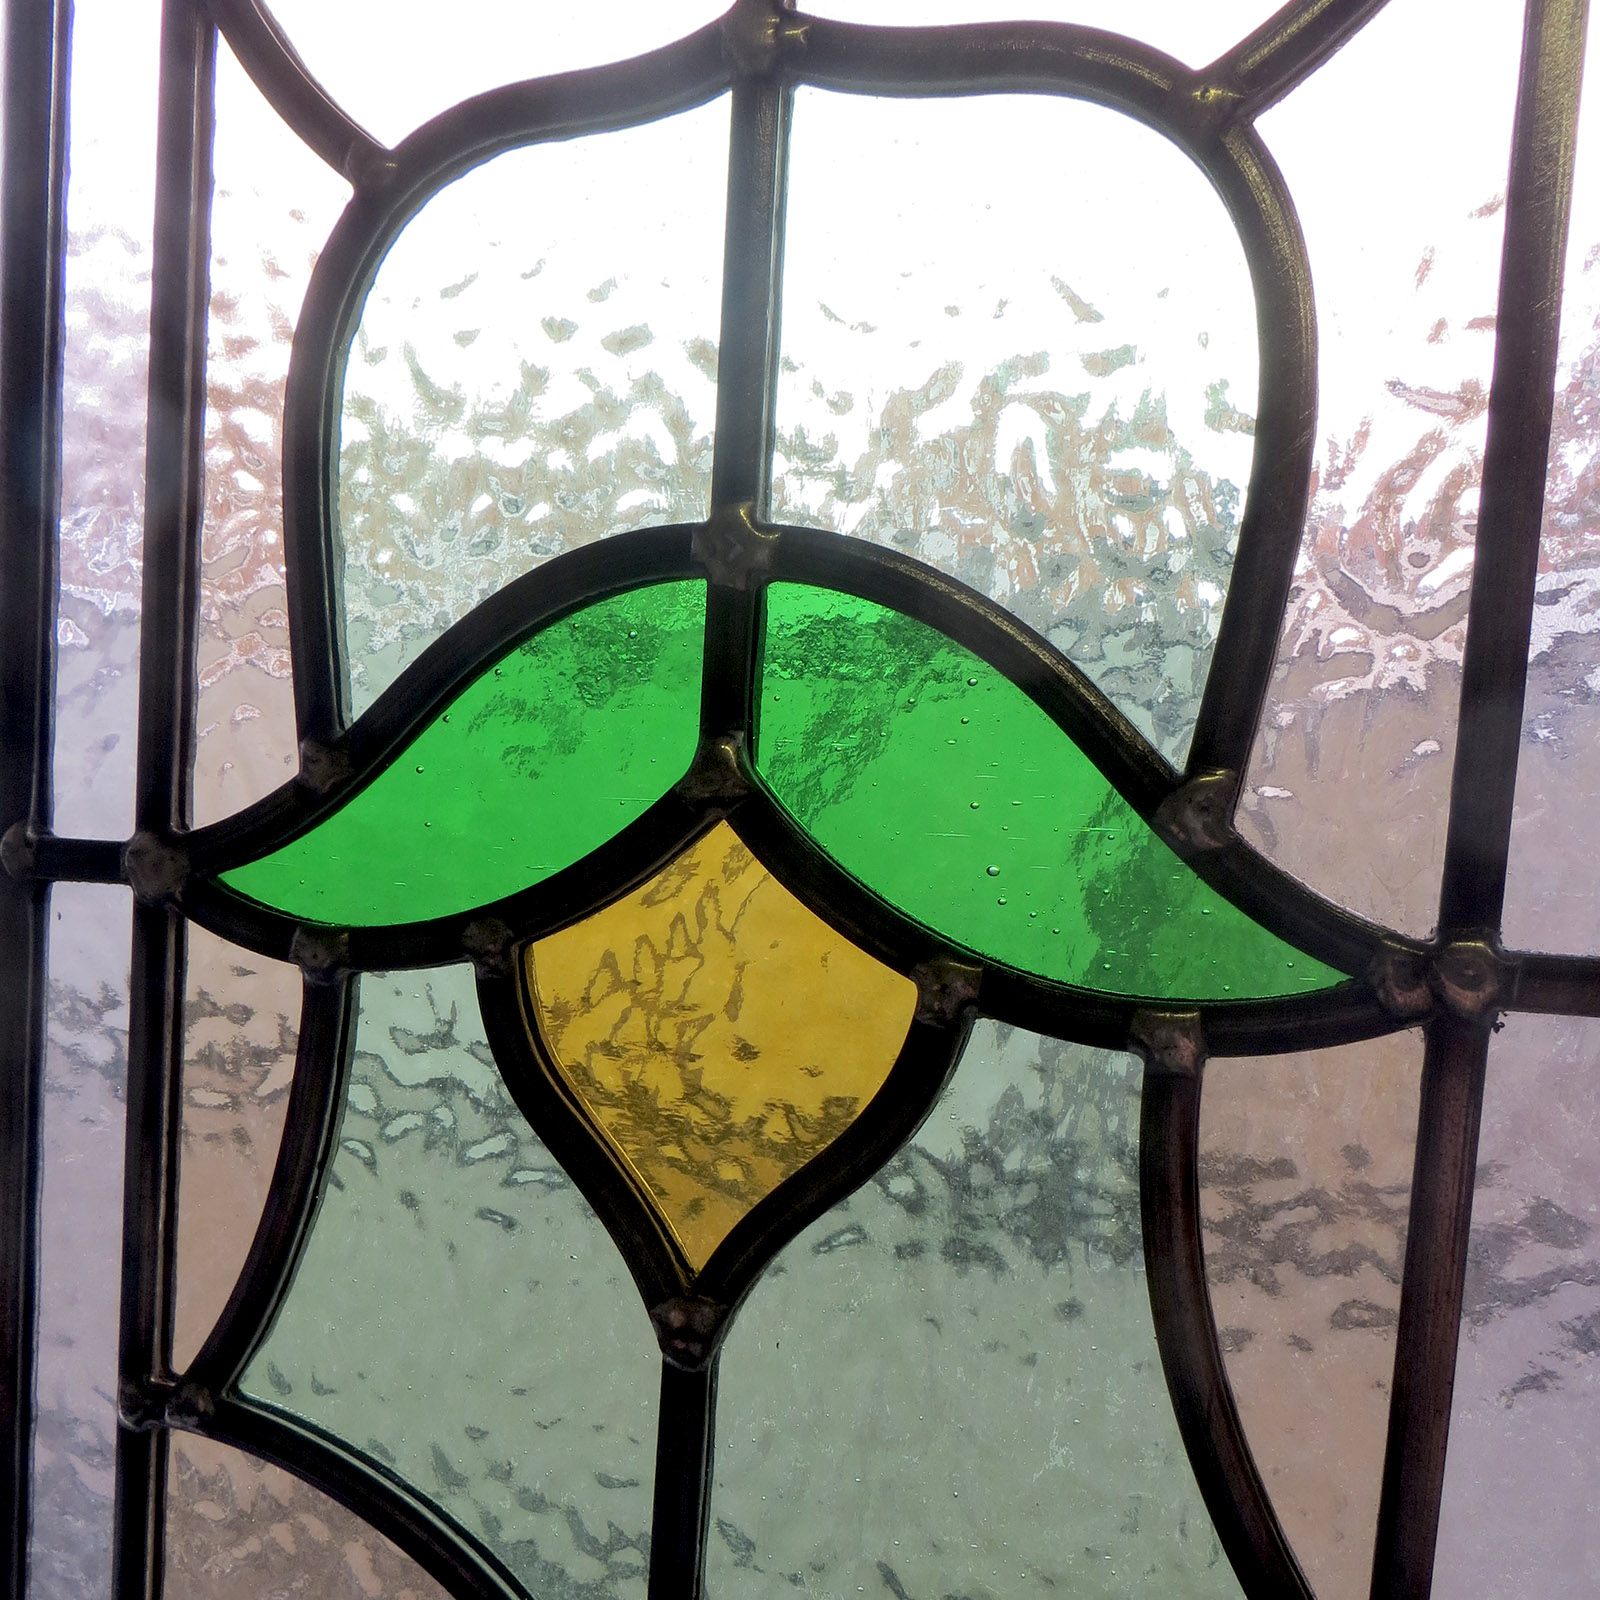 Simple Traditional Stained Glass Panel